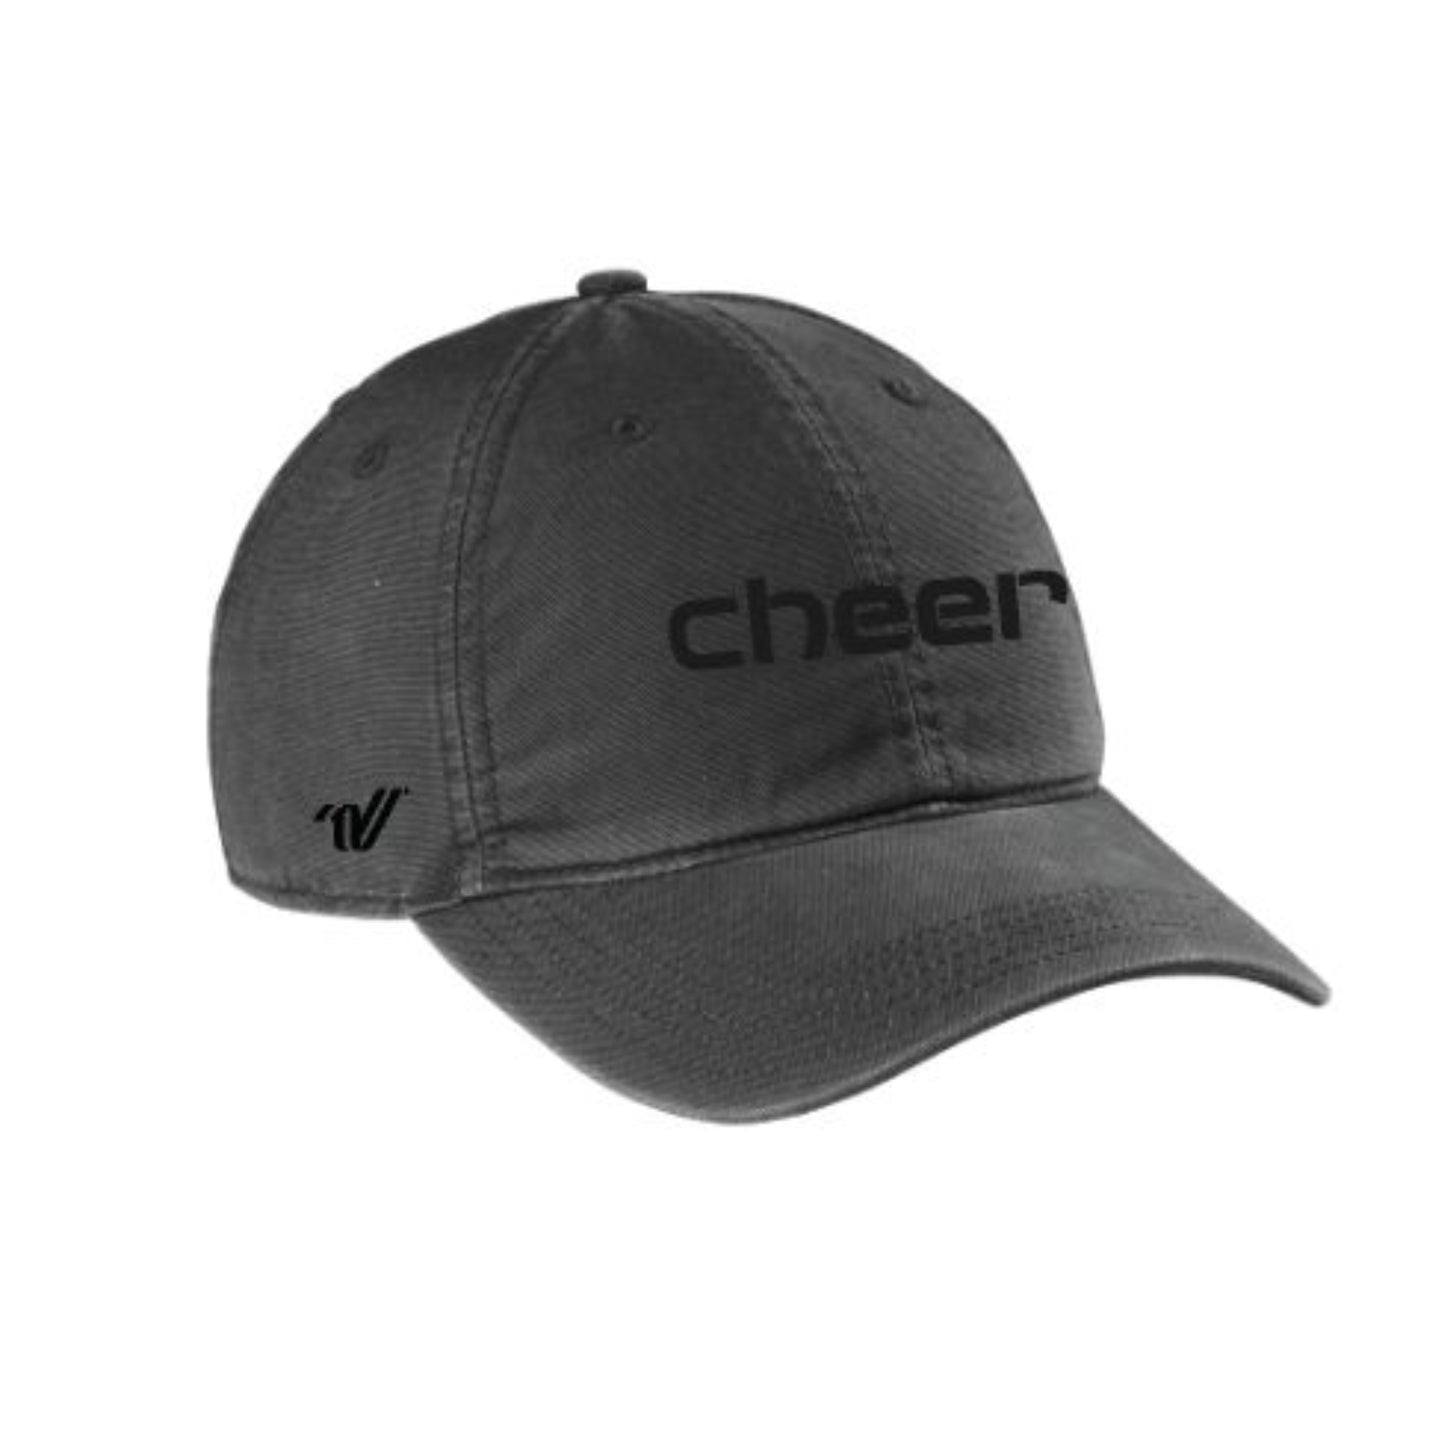 Load image into Gallery viewer, Cheer Black Carhartt Canvas Cap
